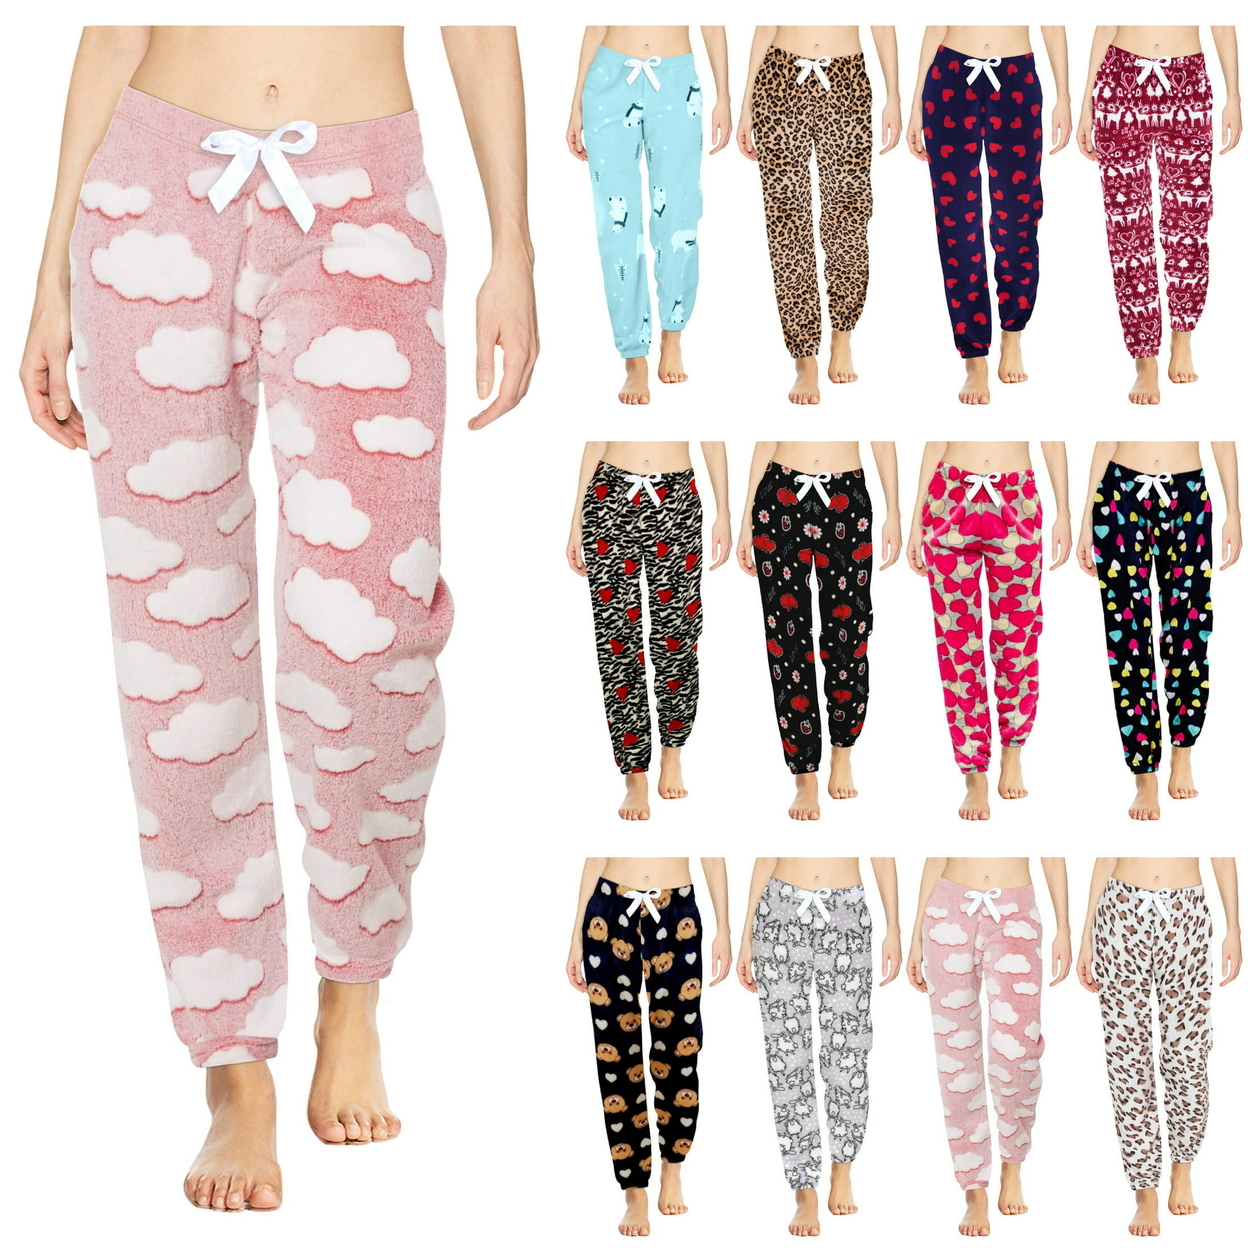 3-Pack: Women's Solid & Printed Ultra-Soft Comfy Stretch Micro-Fleece Pajama Lounge Pants - Medium, Shapes